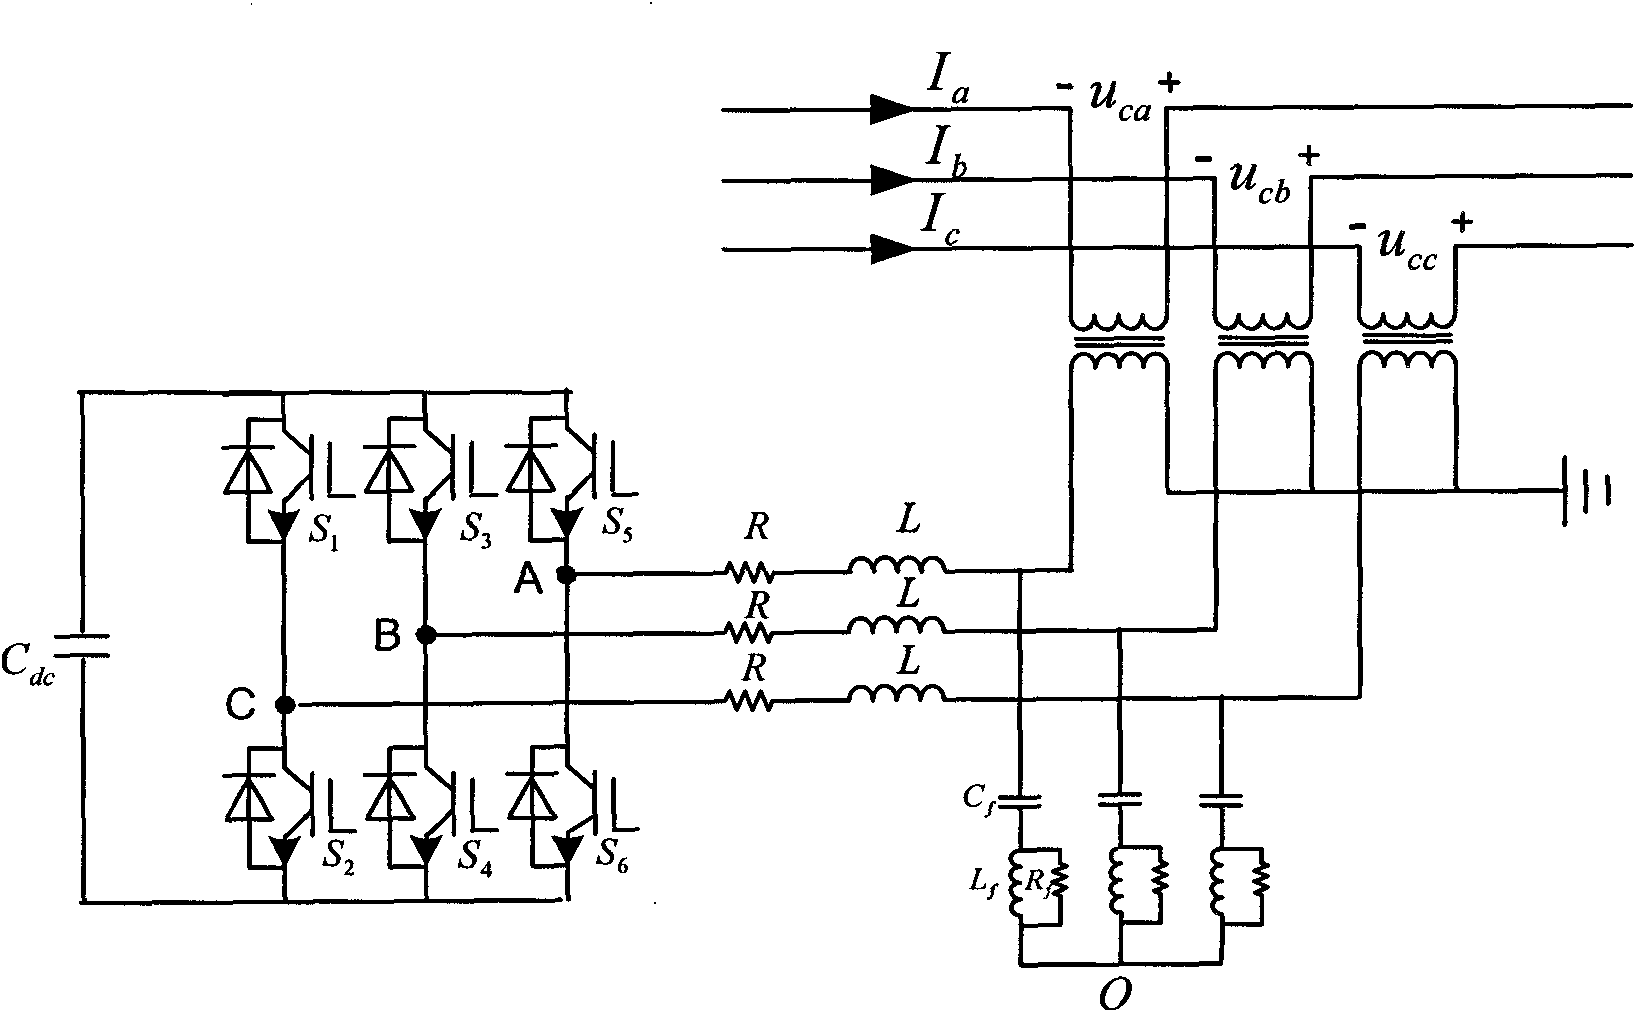 Method for restraining sub-synchronous oscillation of power system based on SSSC (Static Synchronous Series Compensator)